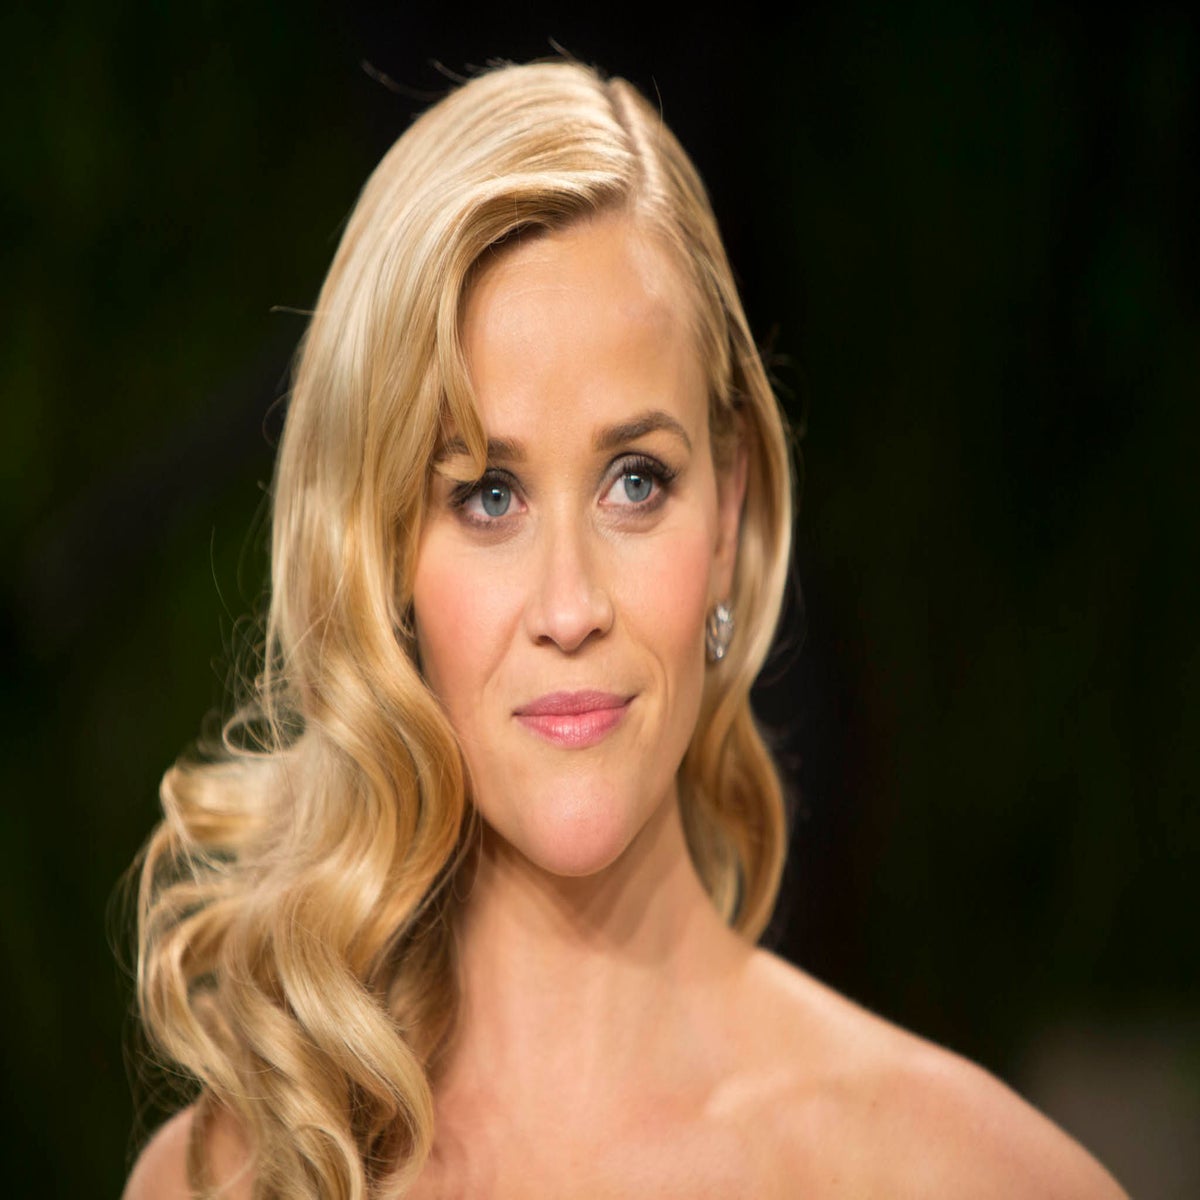 Reese Talks Parenting, Producing Gone Girl and More